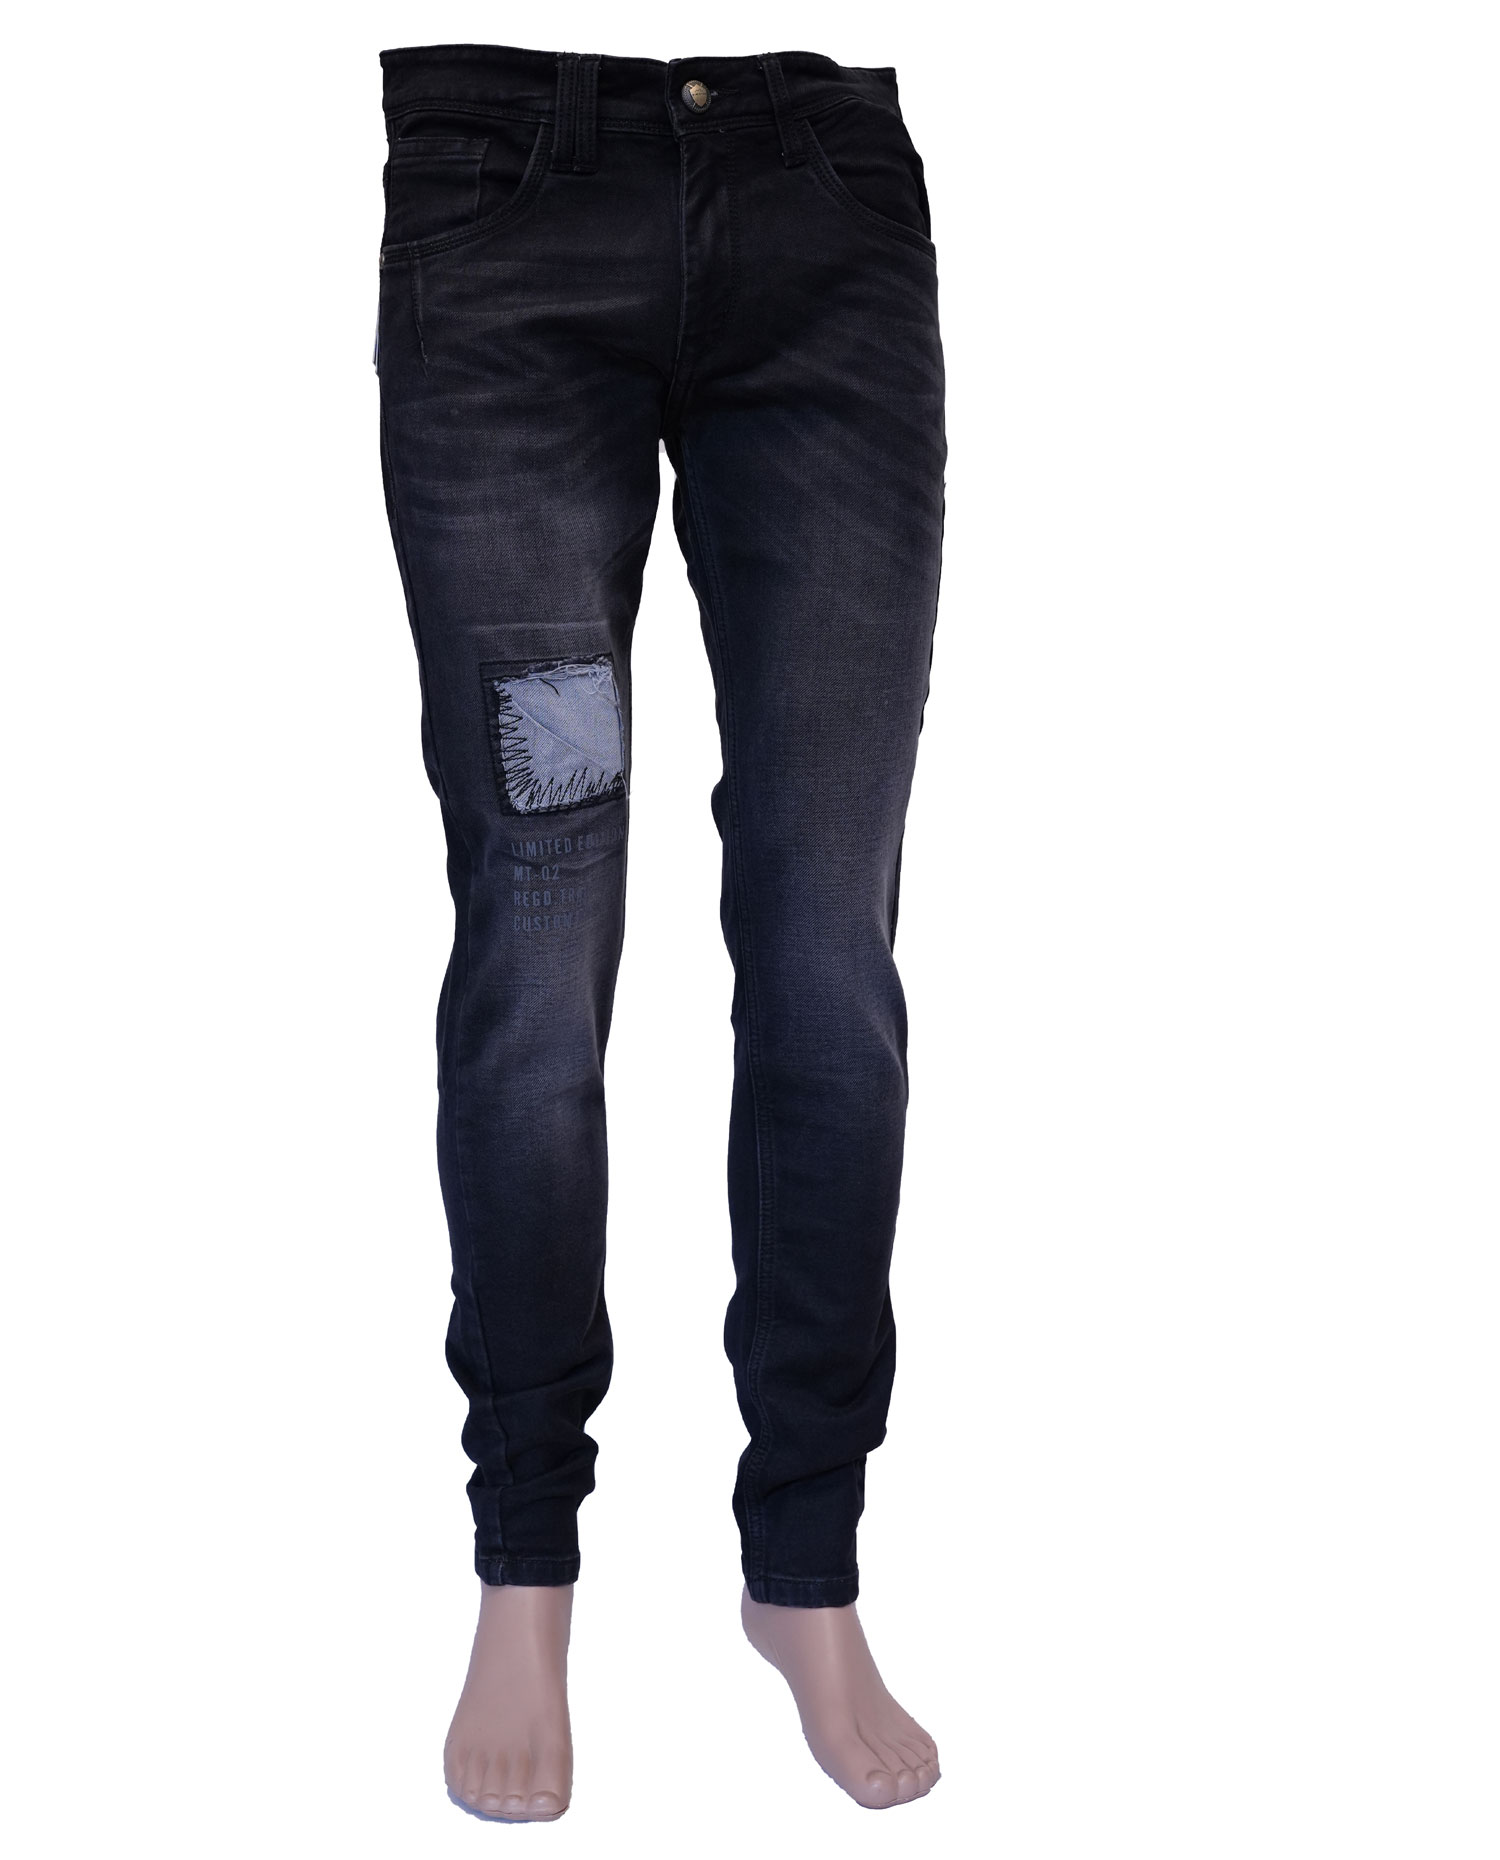 2018 new ripped jeans for men fear of god cotton and denim American and  European style fashion jeans men #1712 - OnshopDeals.Com